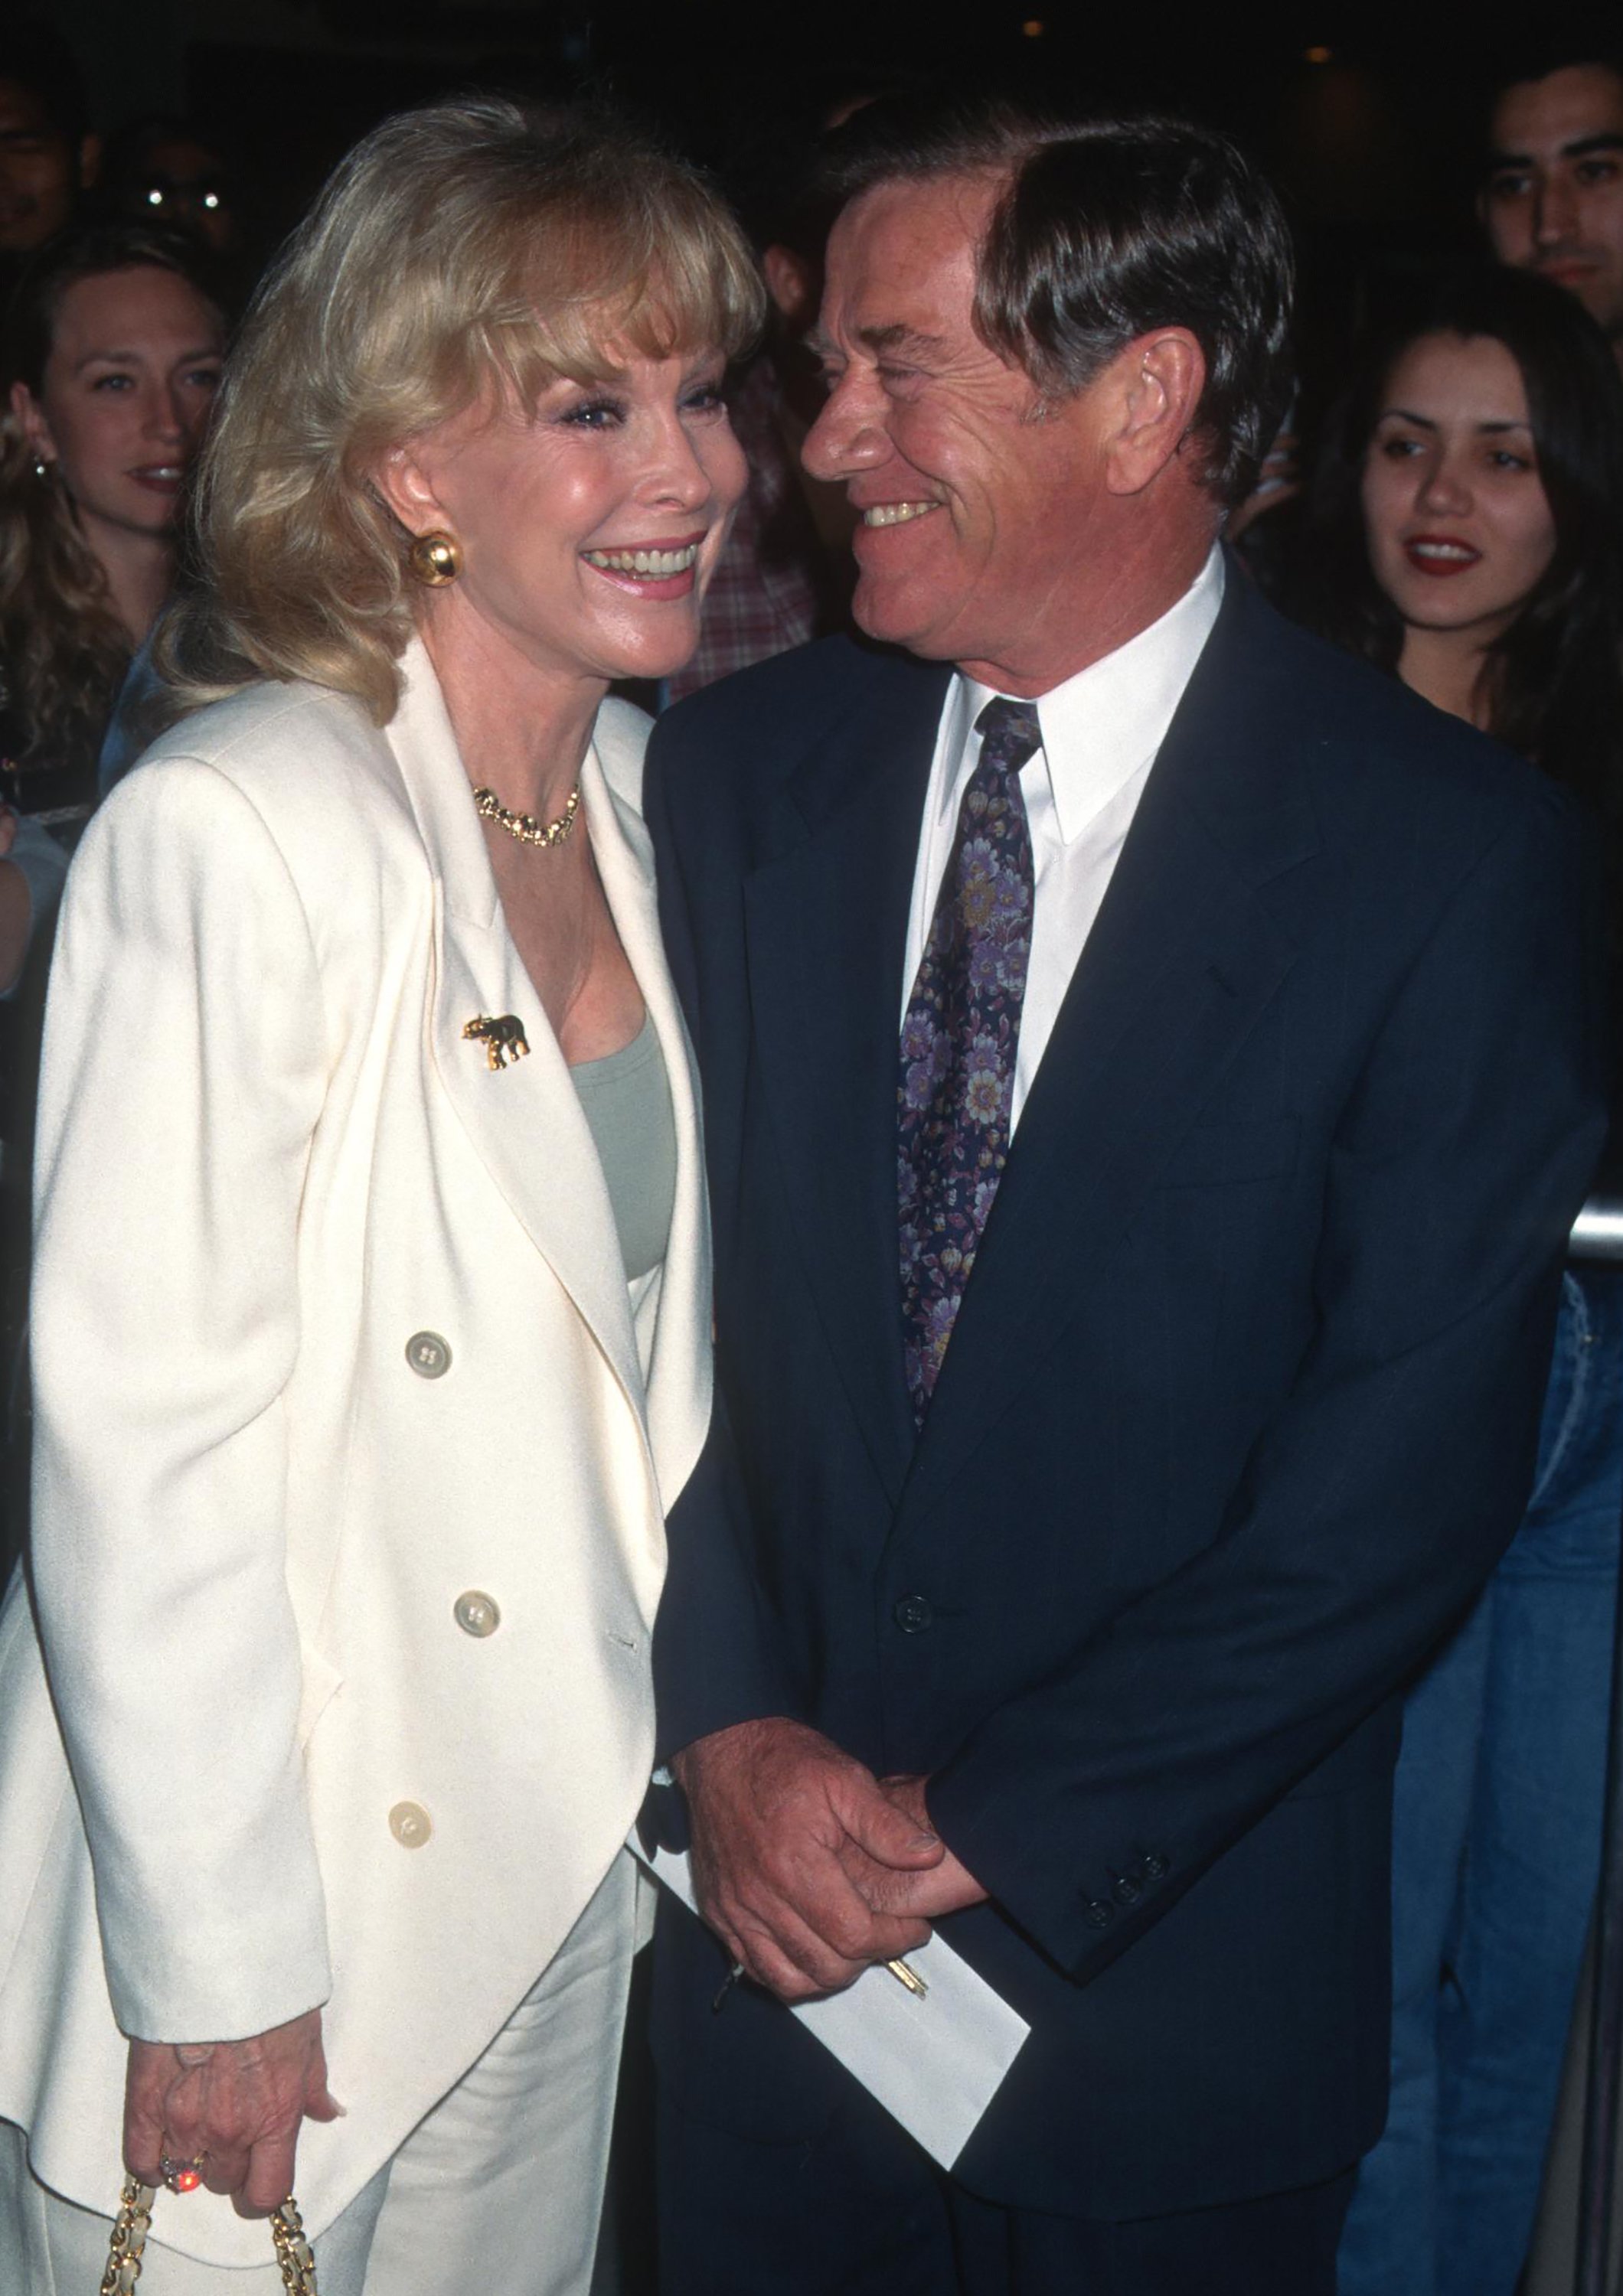 Barbara Eden and Jon Eicholtz attend the 'Broken Arrow' world premiere at Mann National Theater, Westwood, California, February 5, 1996. | Source: Getty Images